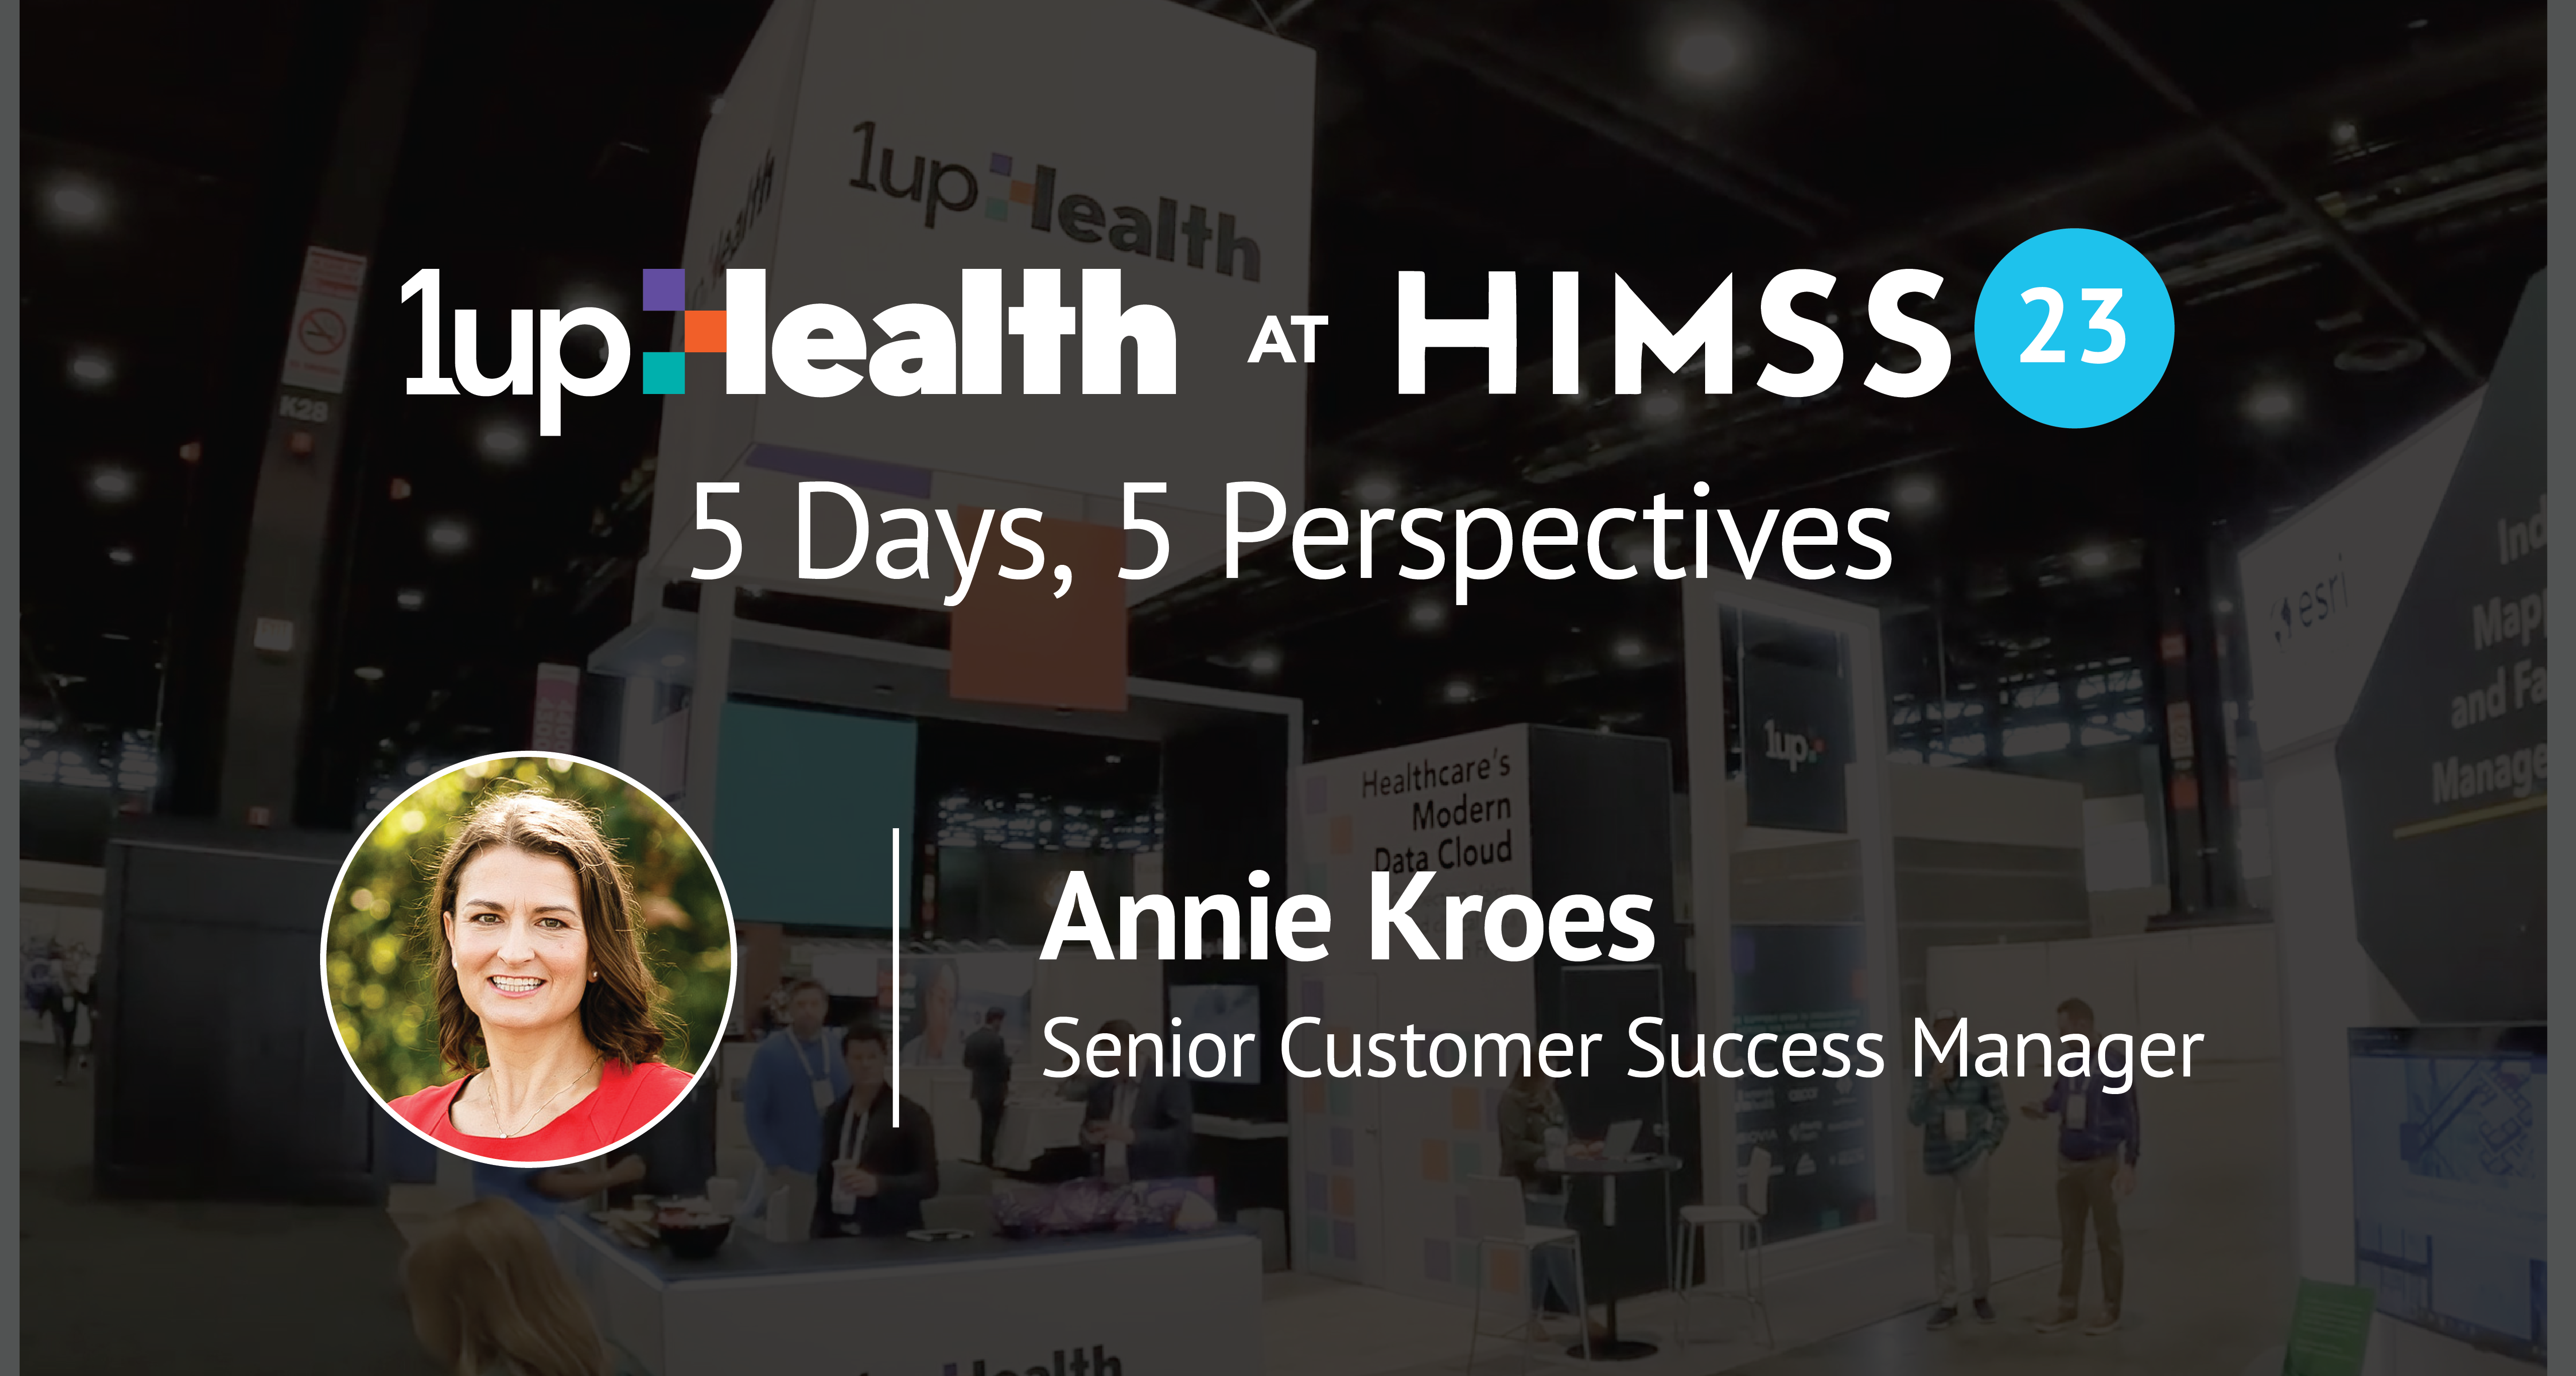 1upHealth at HIMSS23 5 Days, 5 Perspectives with Annie Kroes Senior Customer Success Manager